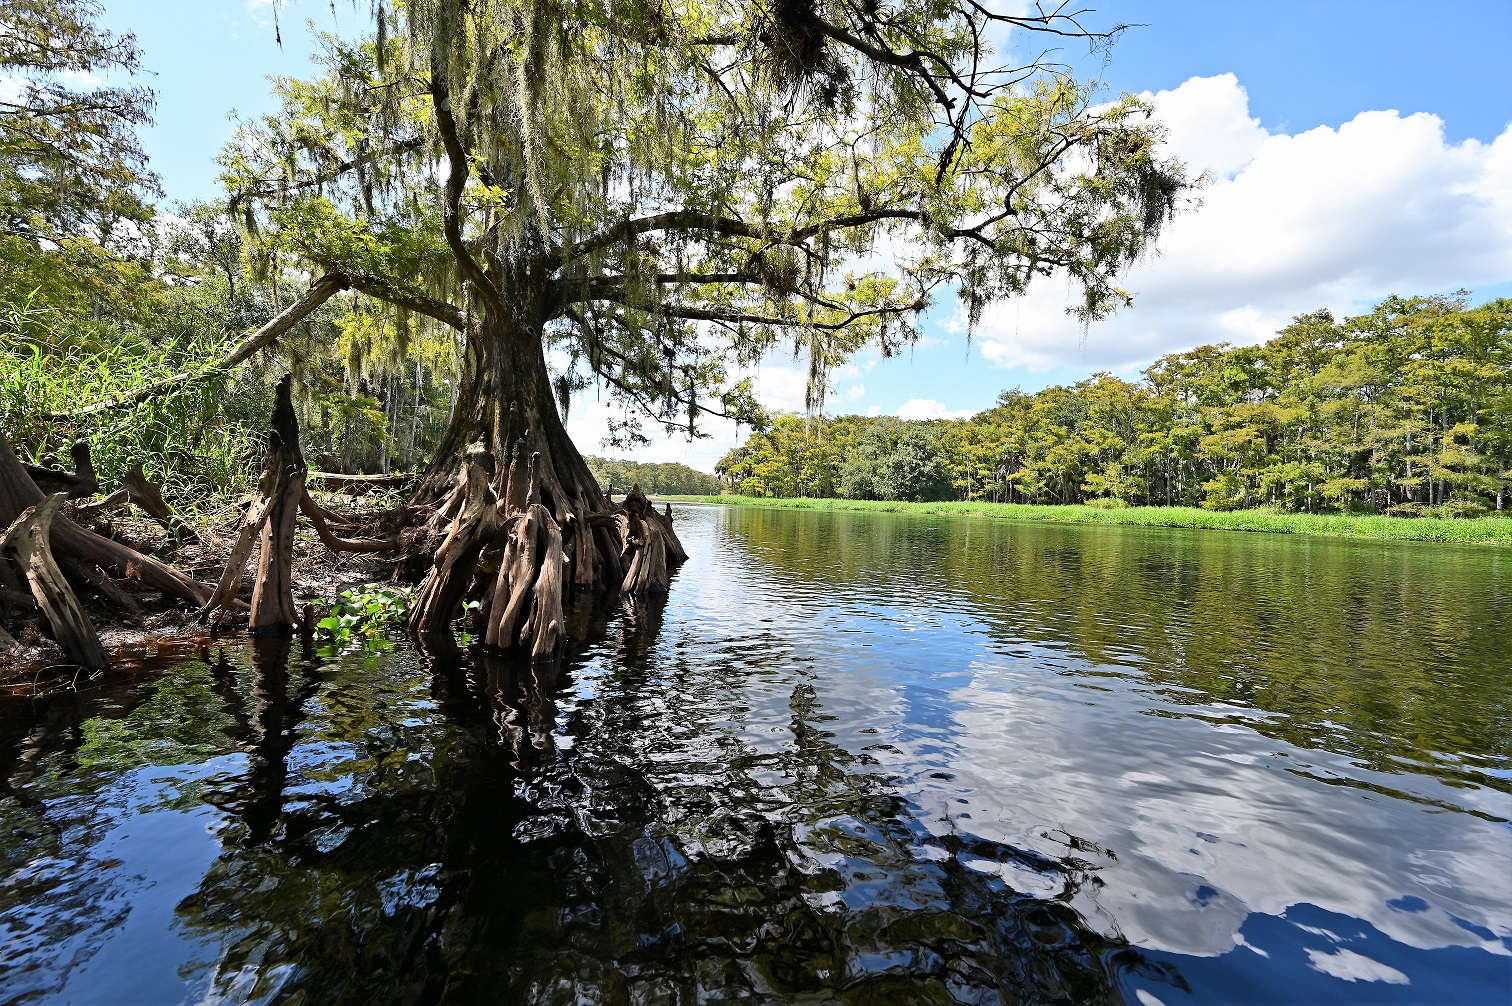 Fisheating Creek is one of the many Florida waterways governed by the Clean Water Act.